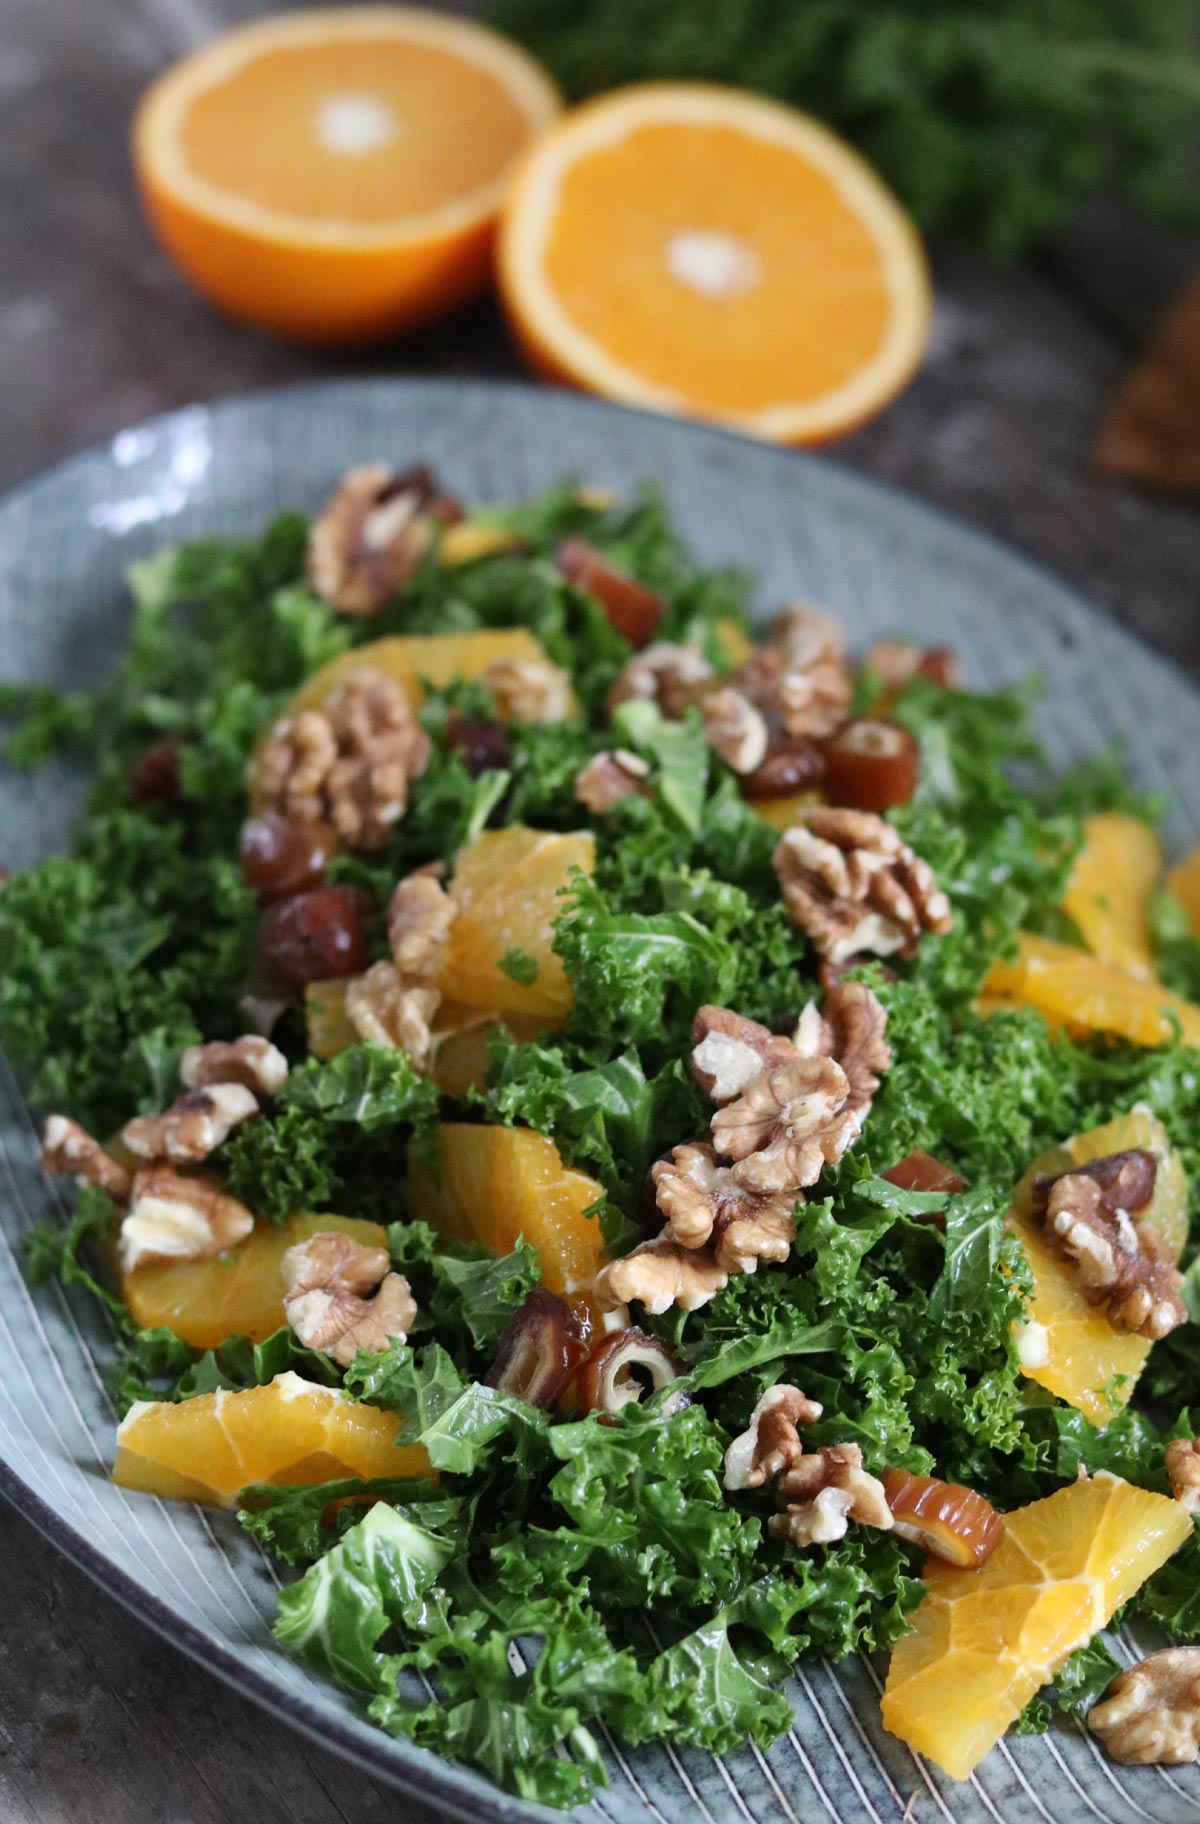 Simple Kale Salad With Walnuts